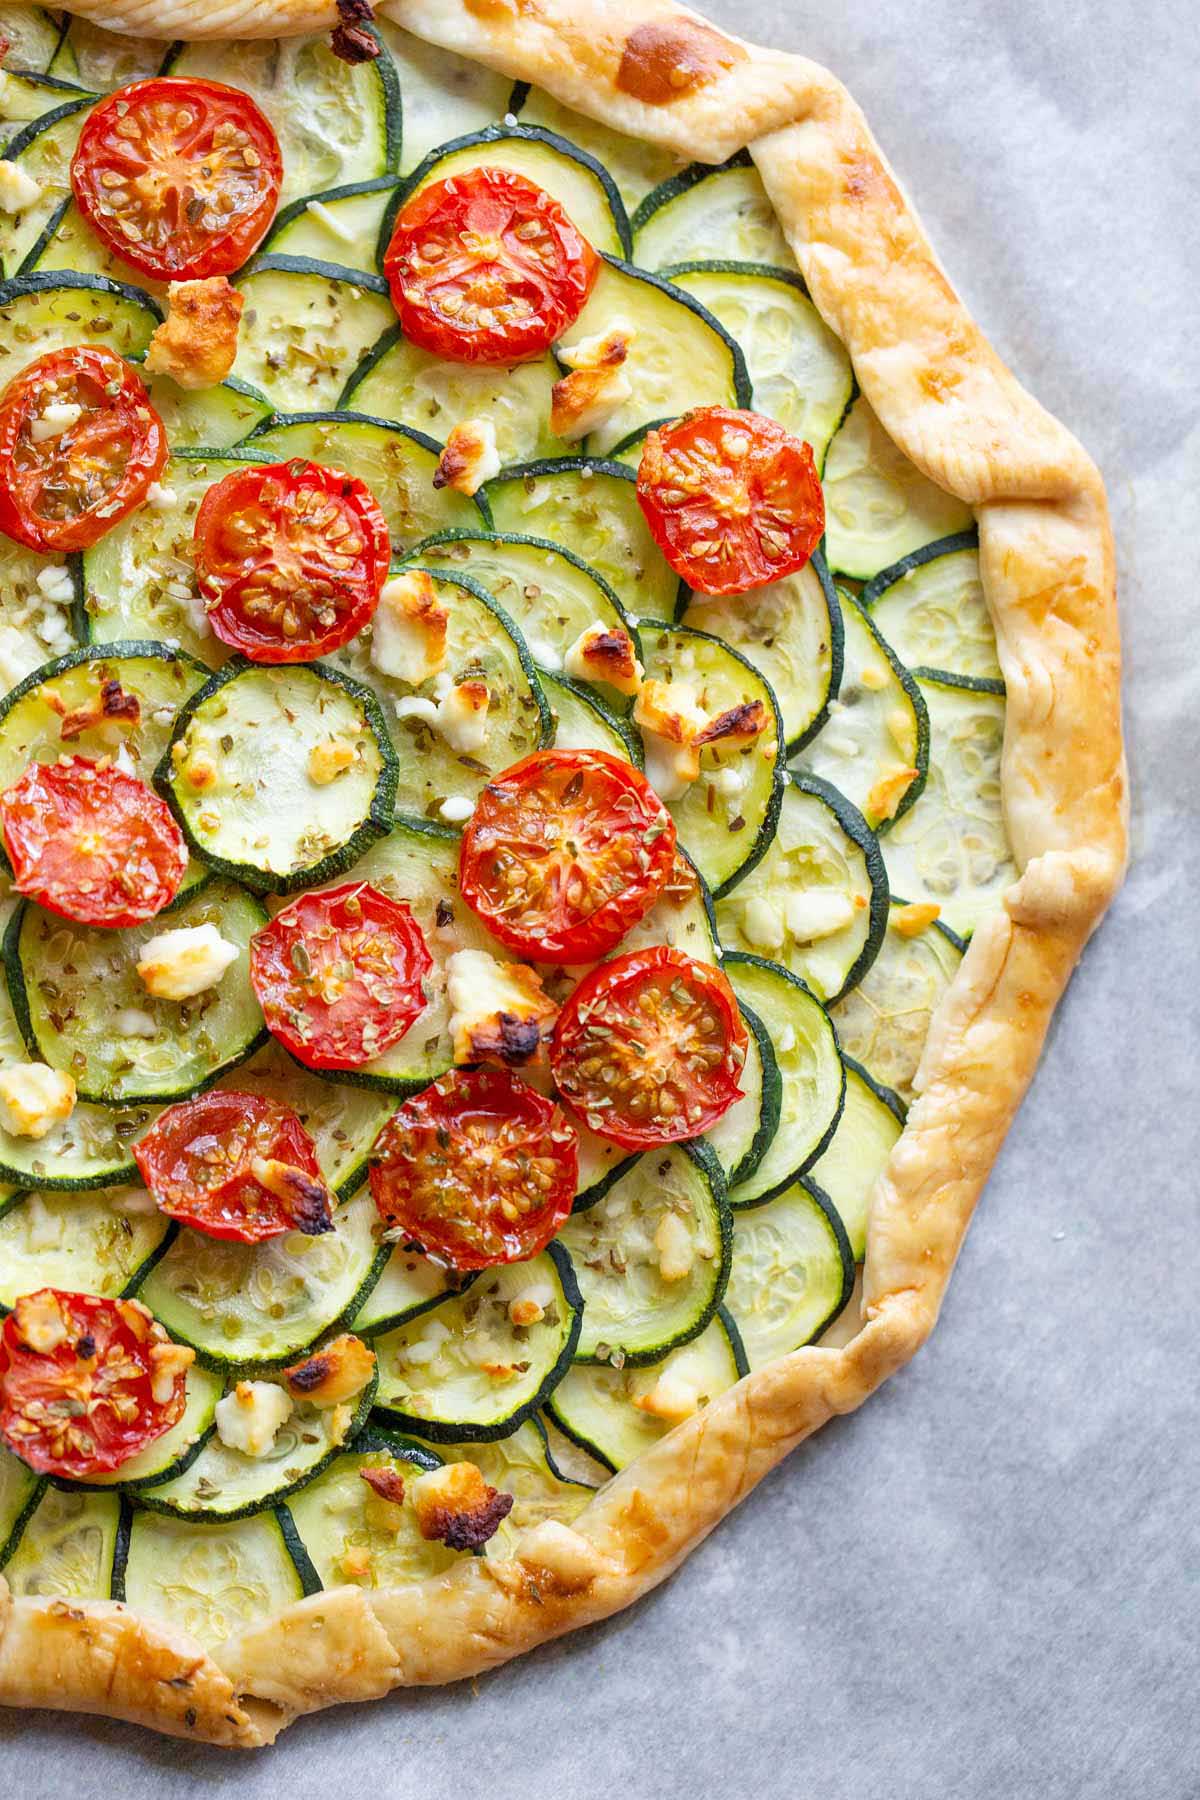 zucchini galette with tomatoes and feta